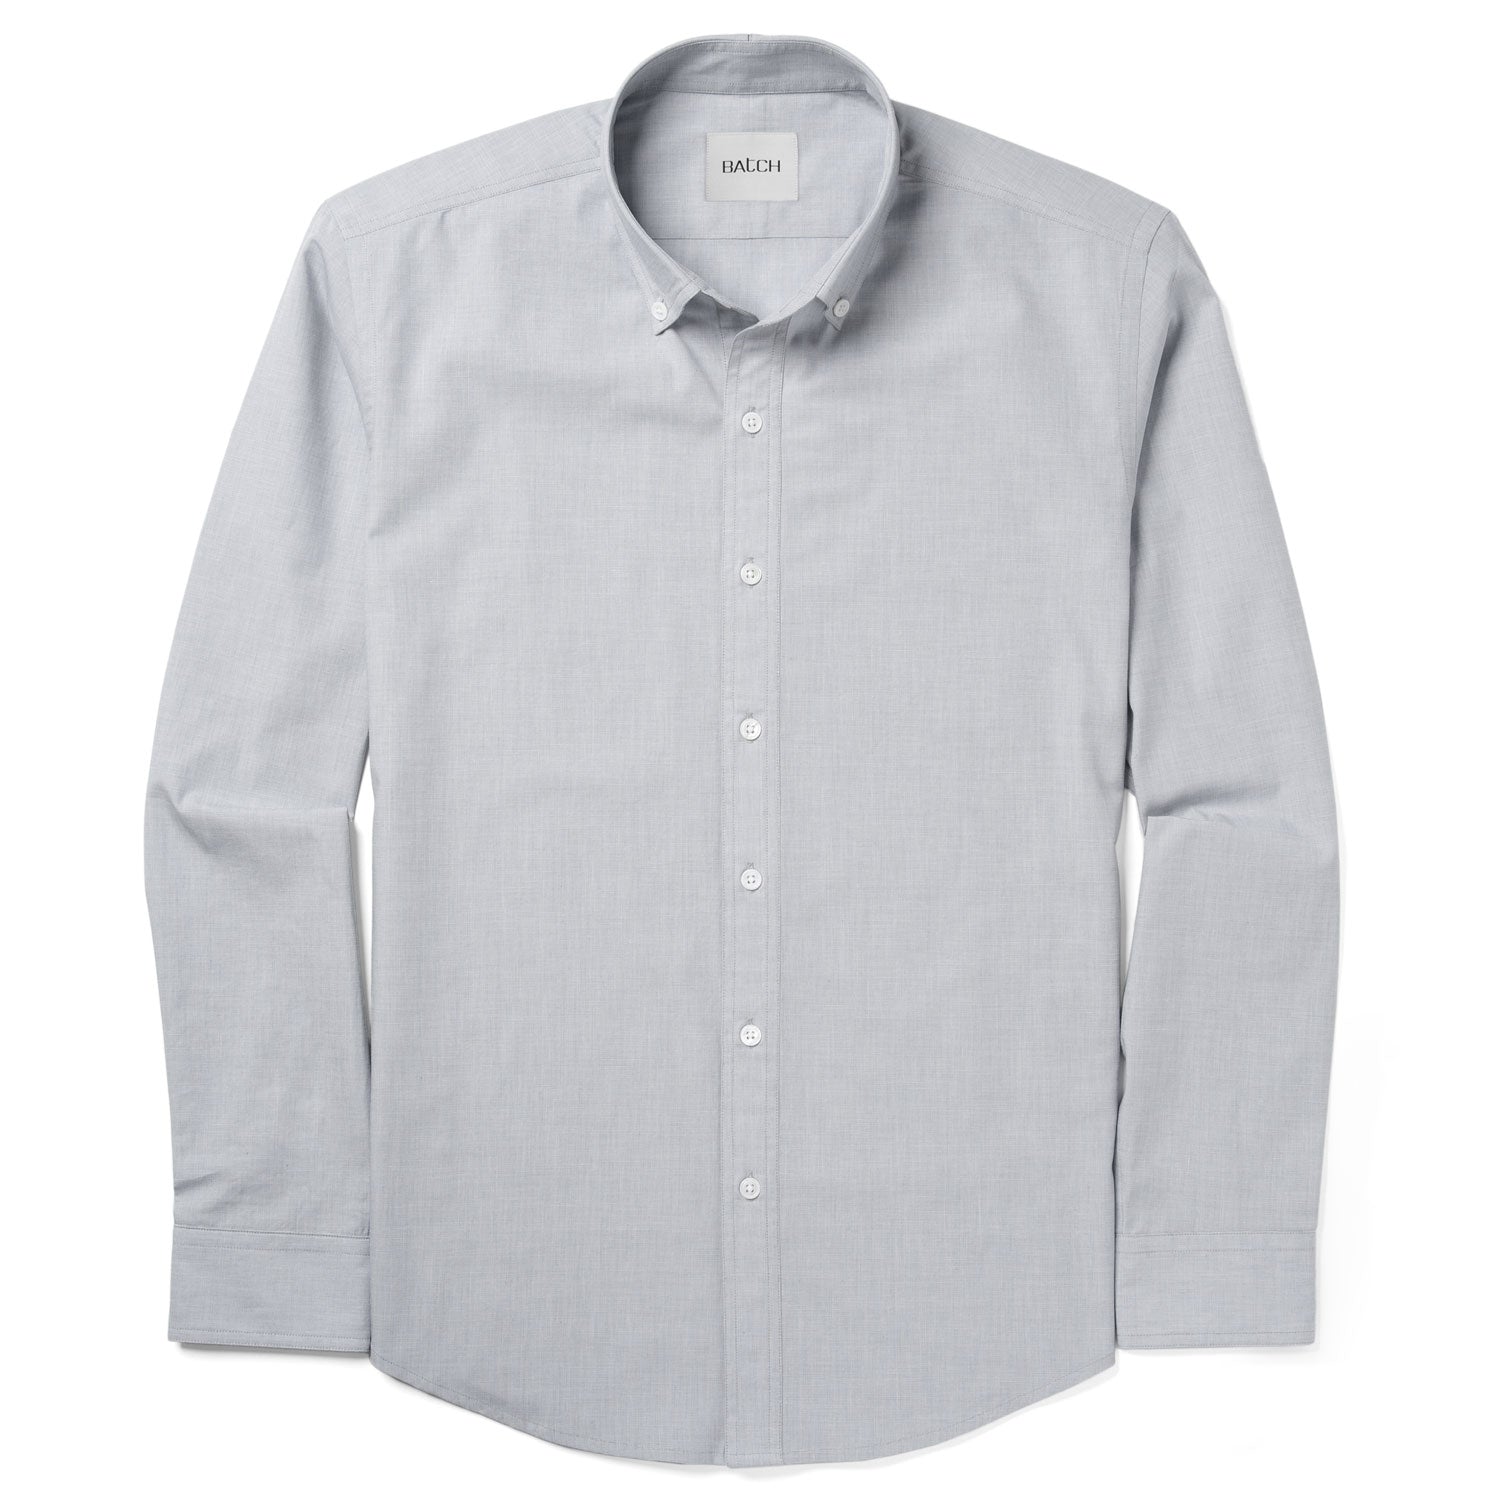 Essential Casual Shirt - Aluminum Gray Cotton End-on-end